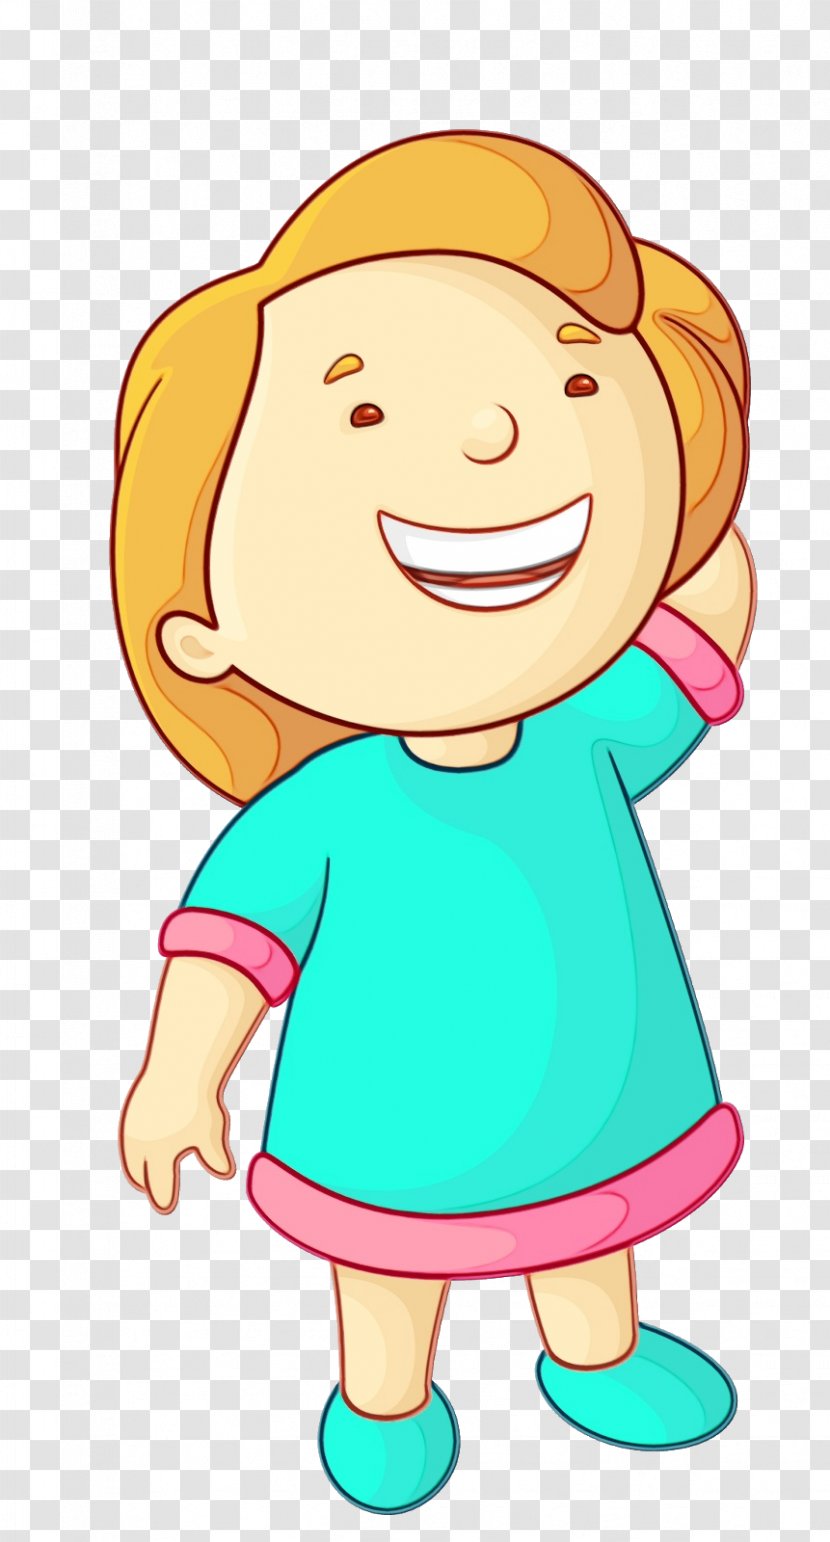 Girl Cartoon - Style Pleased Transparent PNG